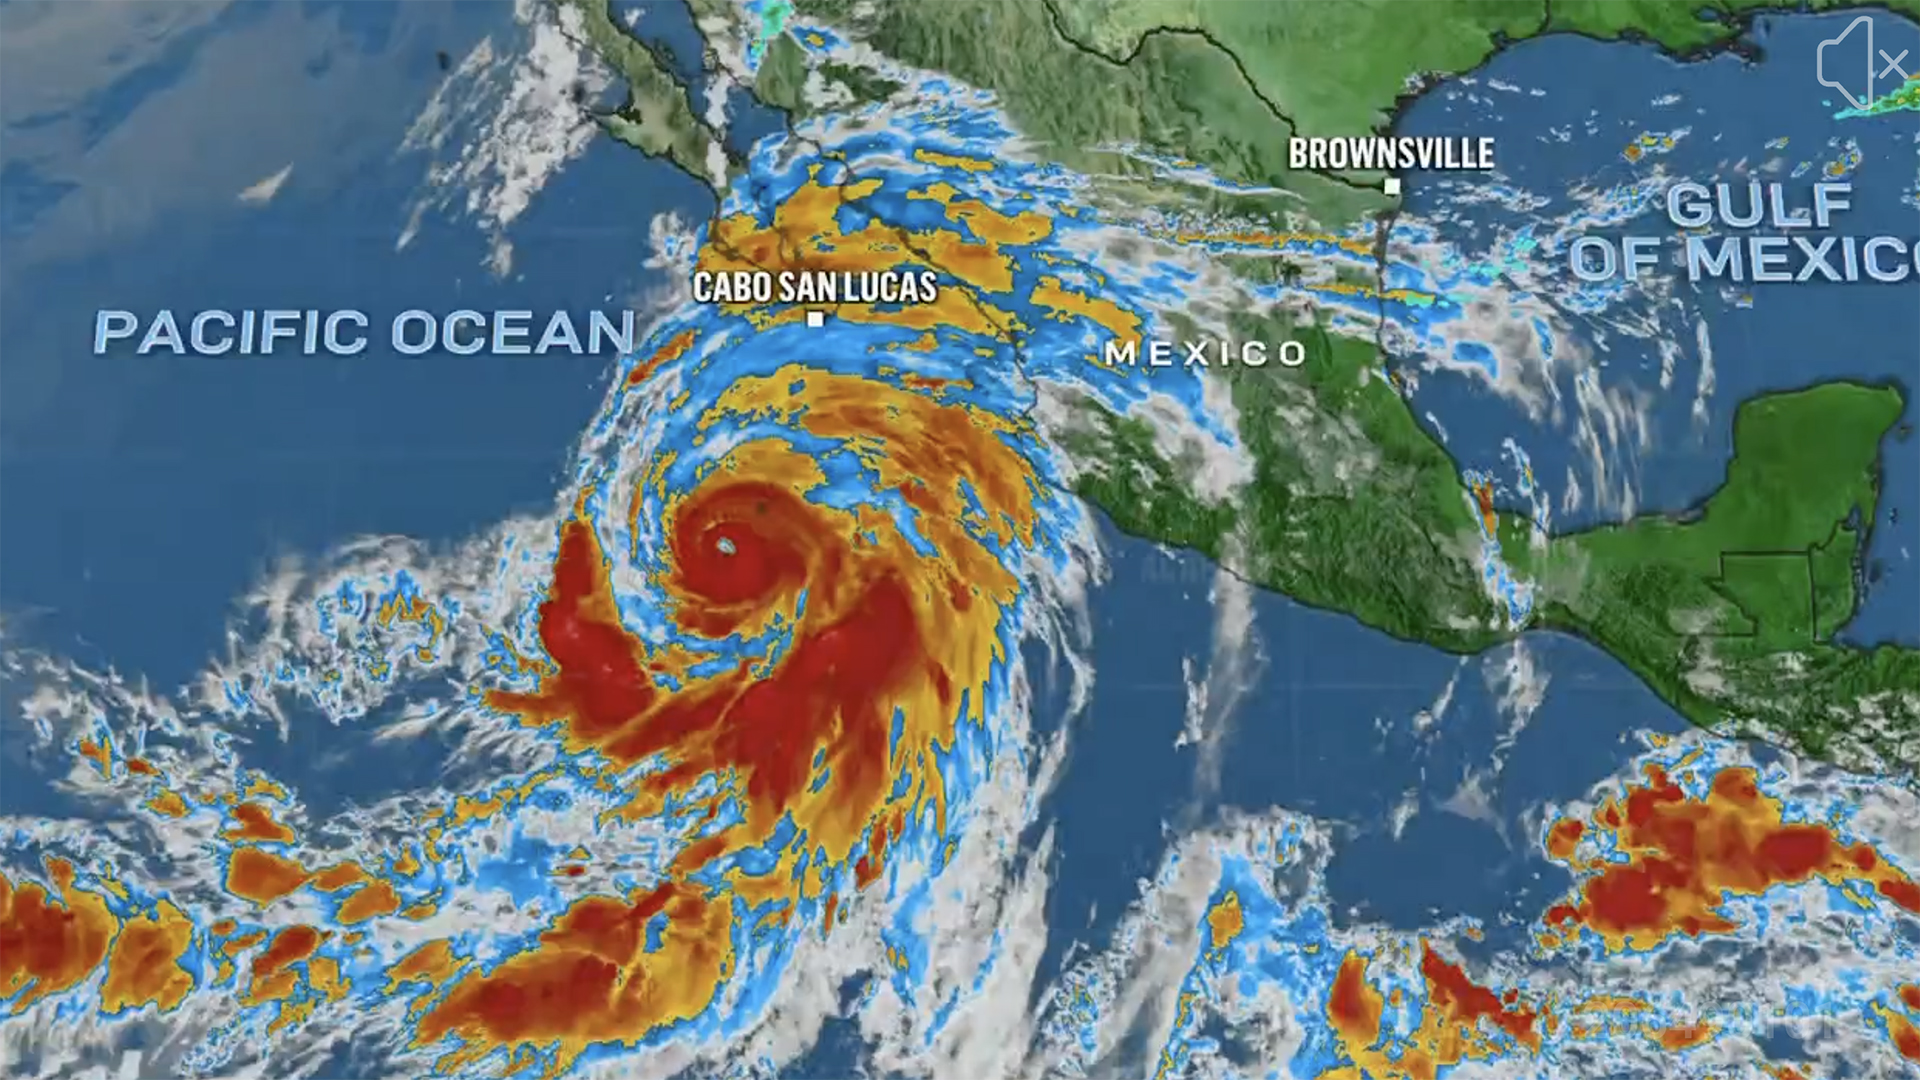 Hurricane Hilary grows off Mexico and could reach California as a